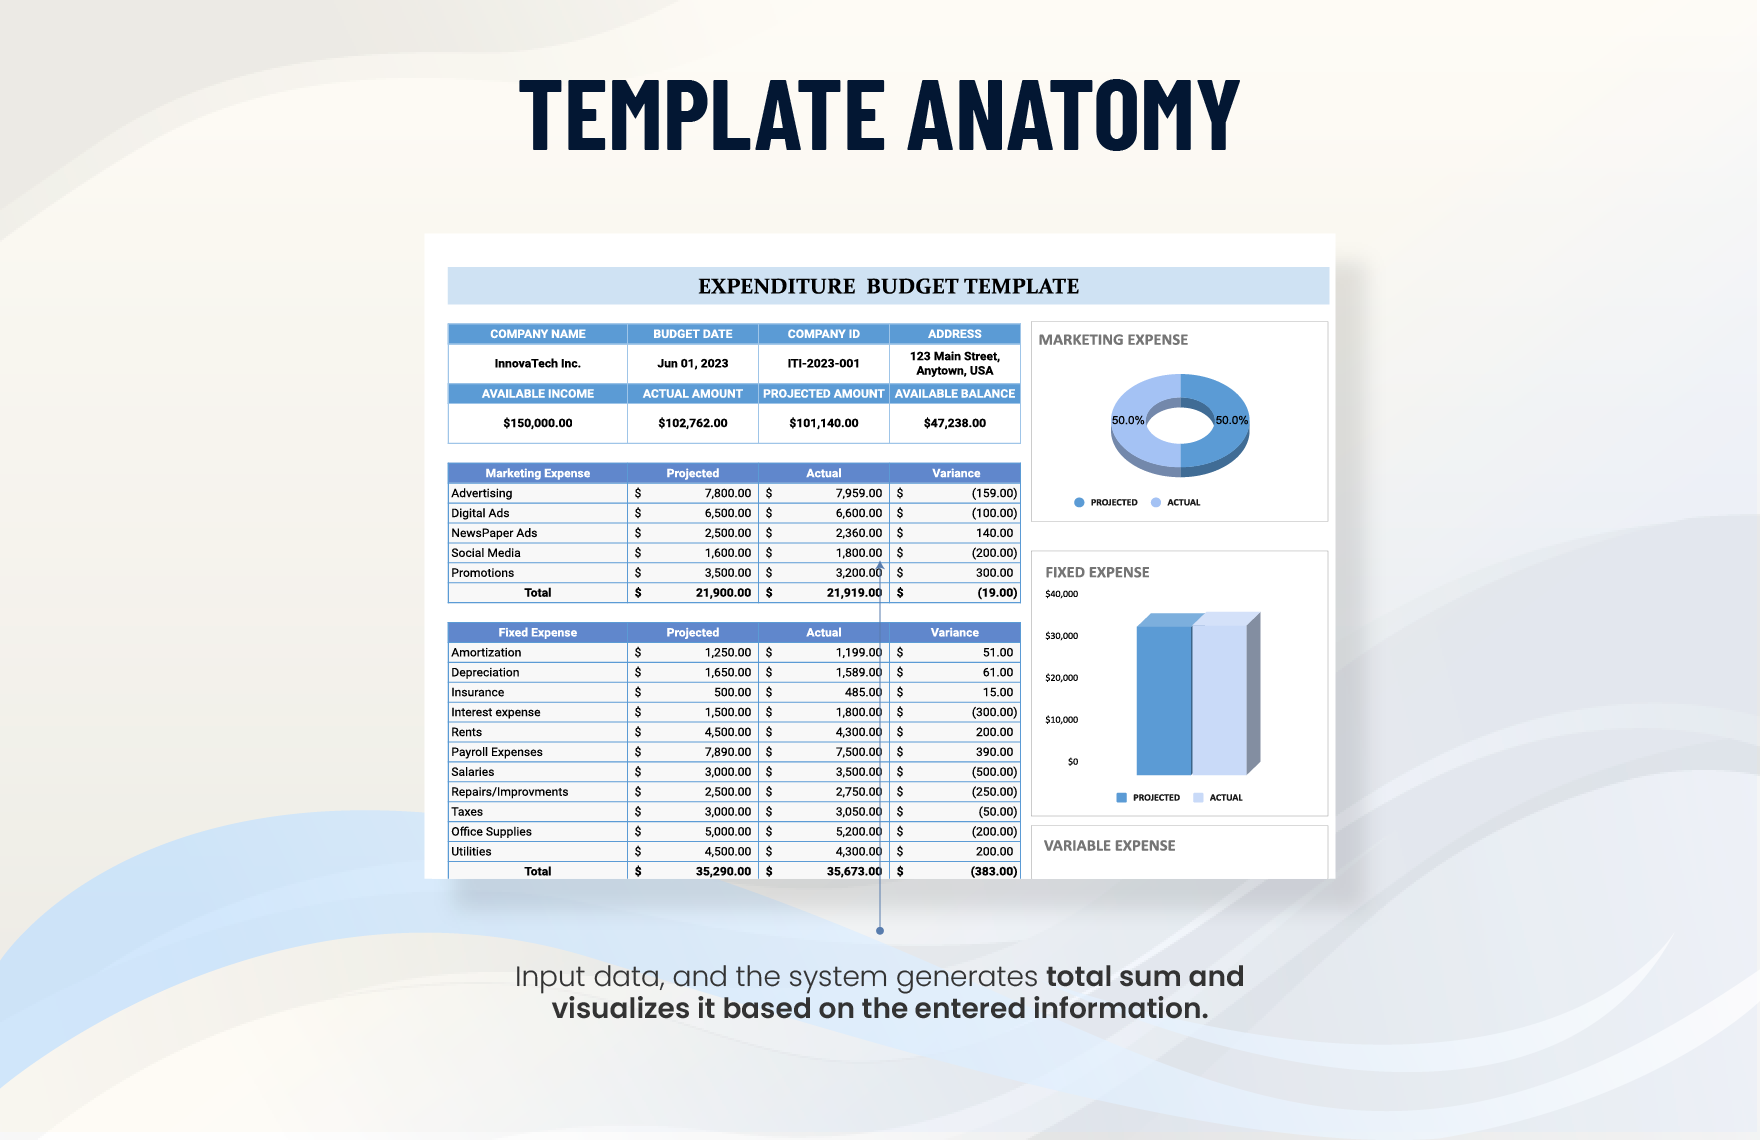 Expenditure Budget Template